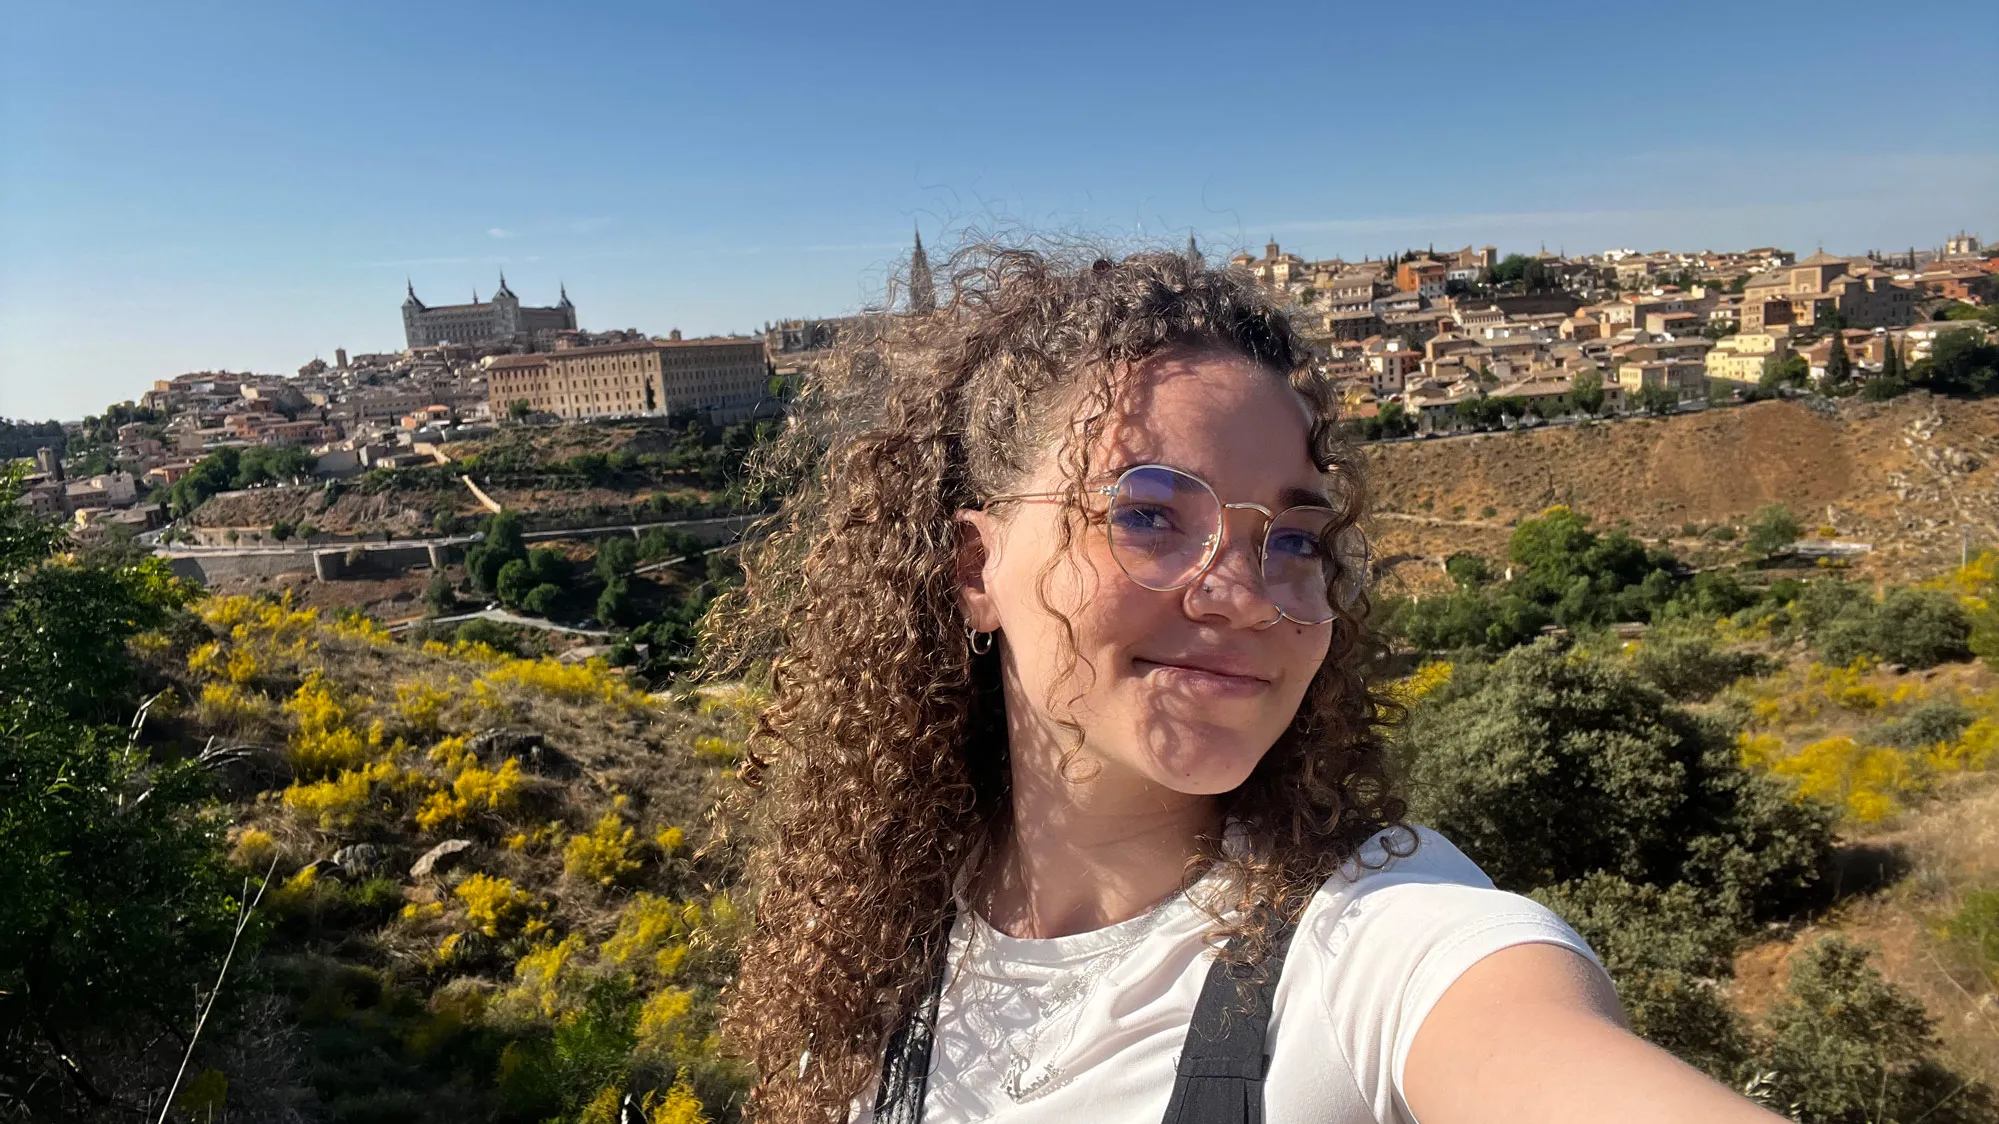 Ariana Winbush, a pretty young woman with long, curly hair smiles as she takes a selfie on a hill outside a town in Spain on a sunny day.